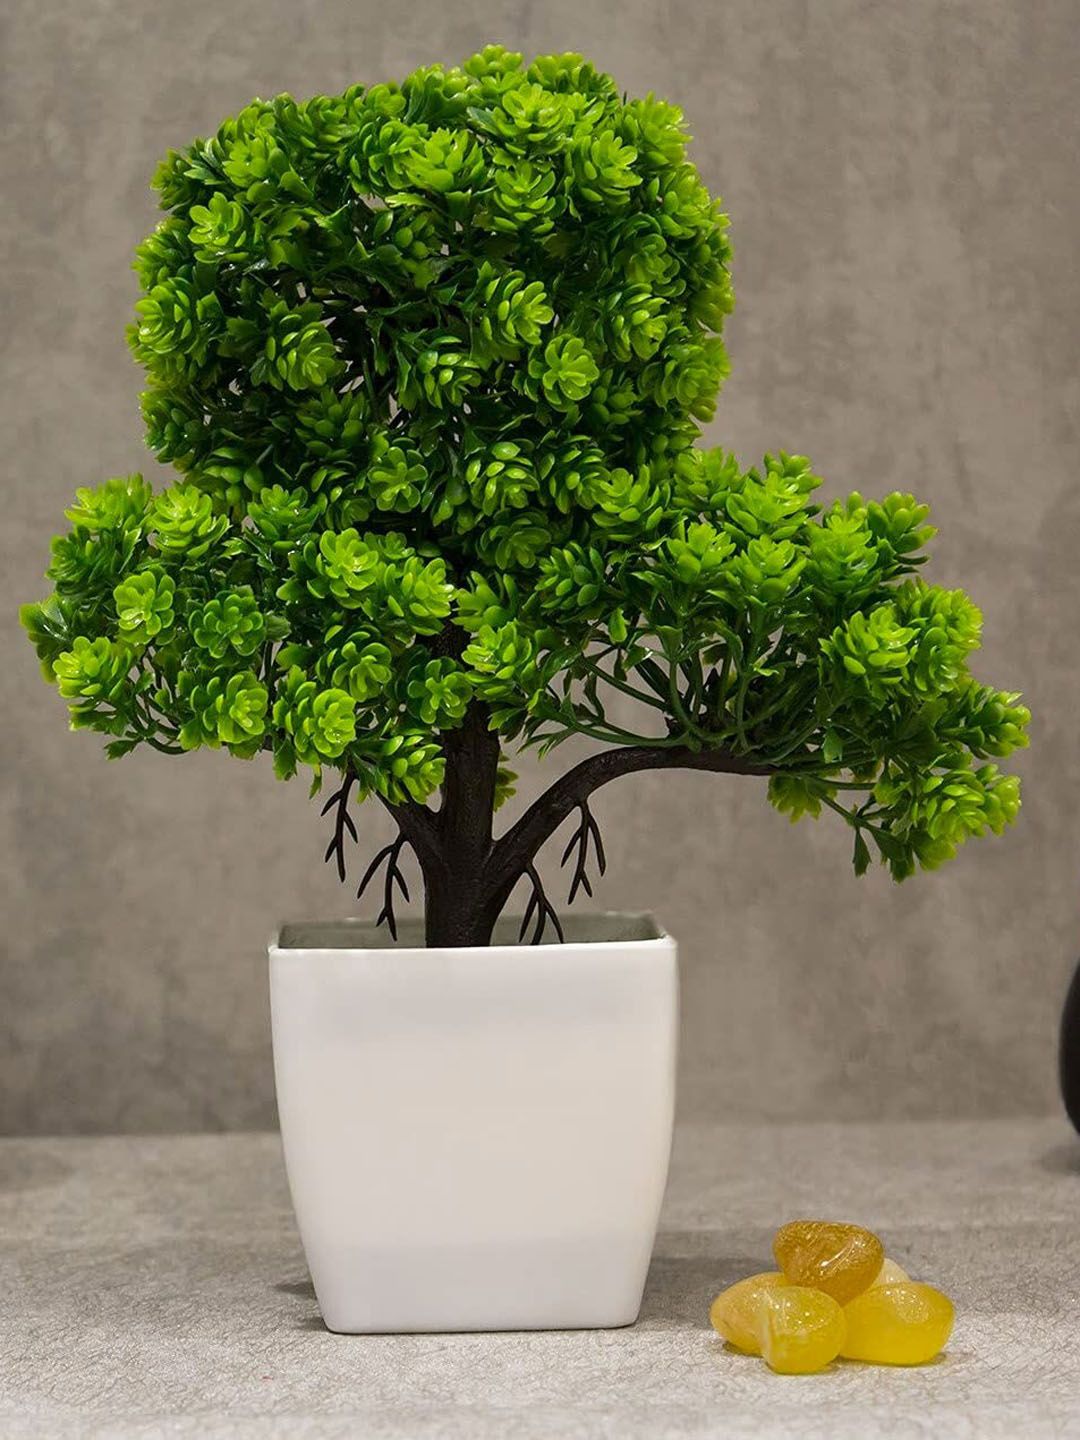 AMFLIX Green Bonsai Artificial Flowers & Plants With Pot Price in India